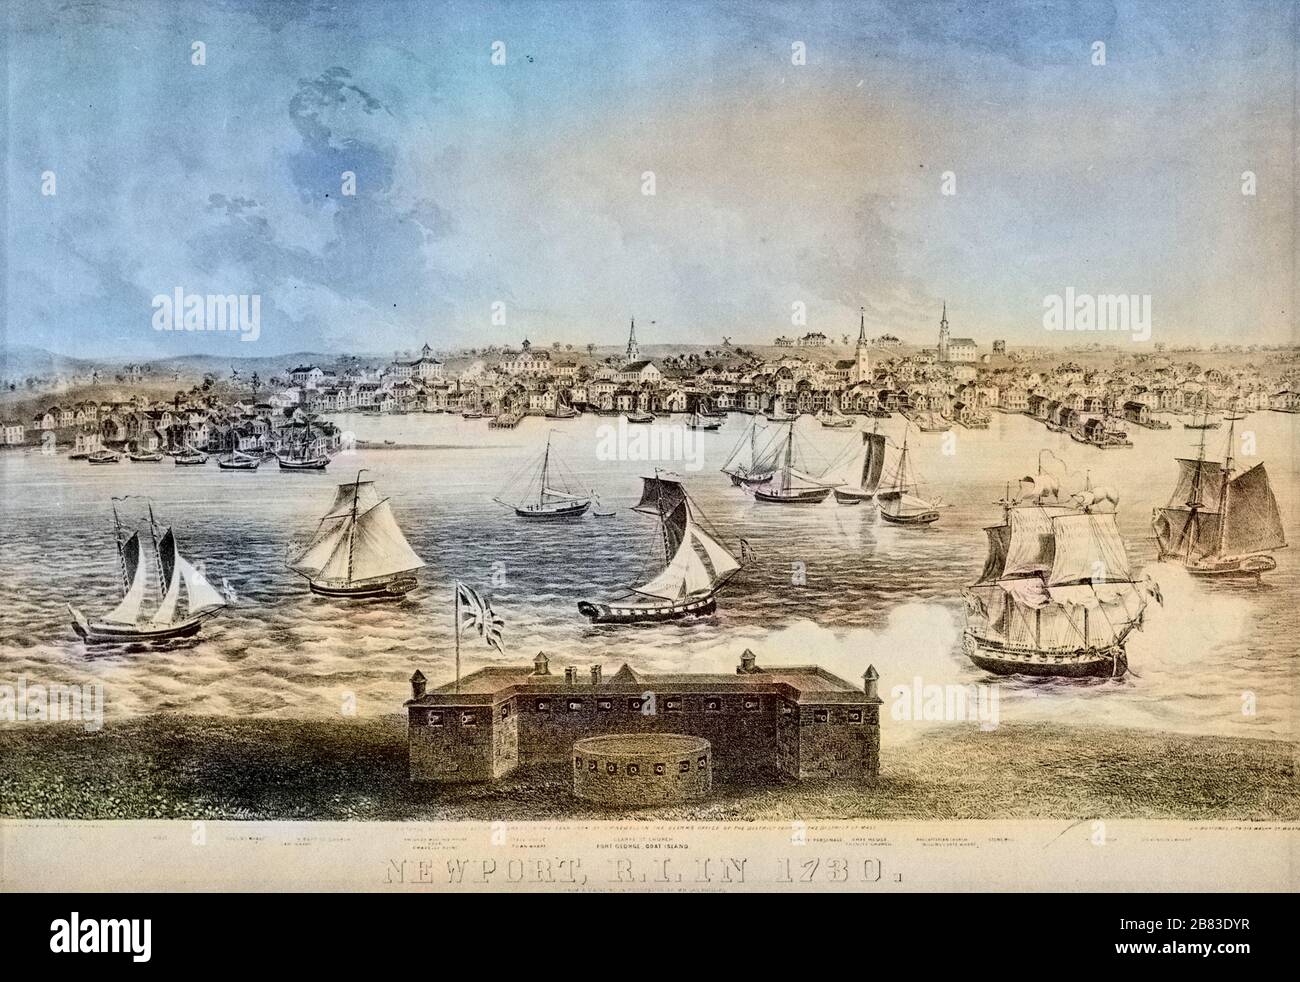 Engraving of the City of Newport on Aquidneck Island in Newport County, Rhode Island, 1730. Note: Image has been digitally colorized using a modern process. Colors may not be period-accurate. () Stock Photo